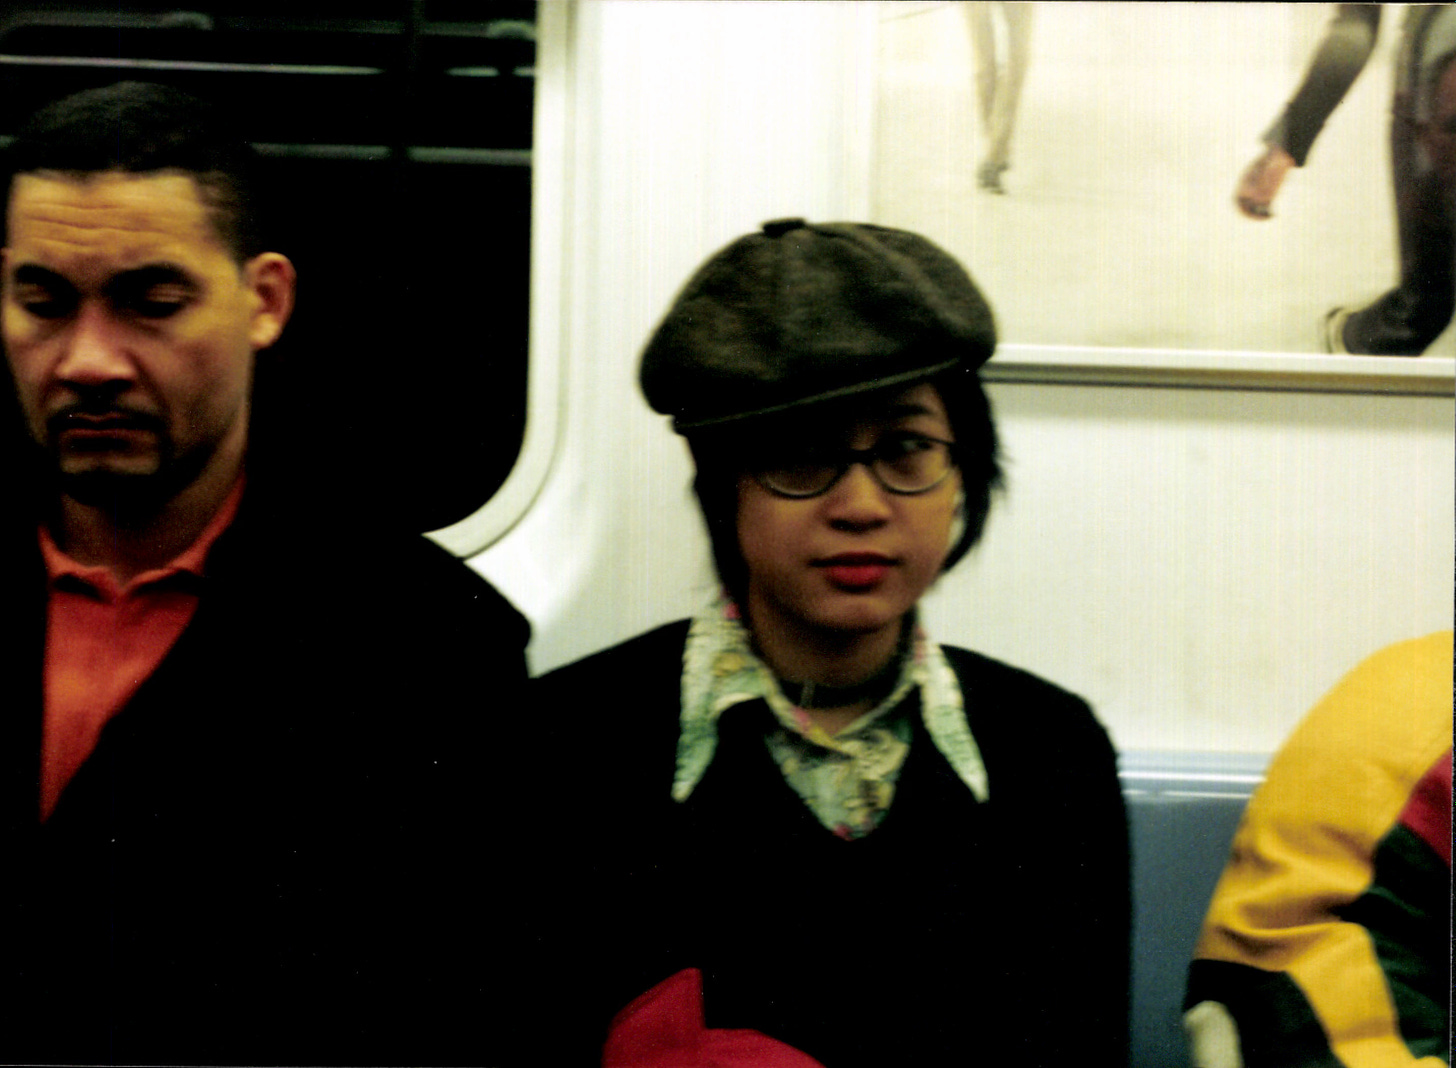 asian girl wearing a pageboy hat sirtting on the subway between two people, a man and an arm